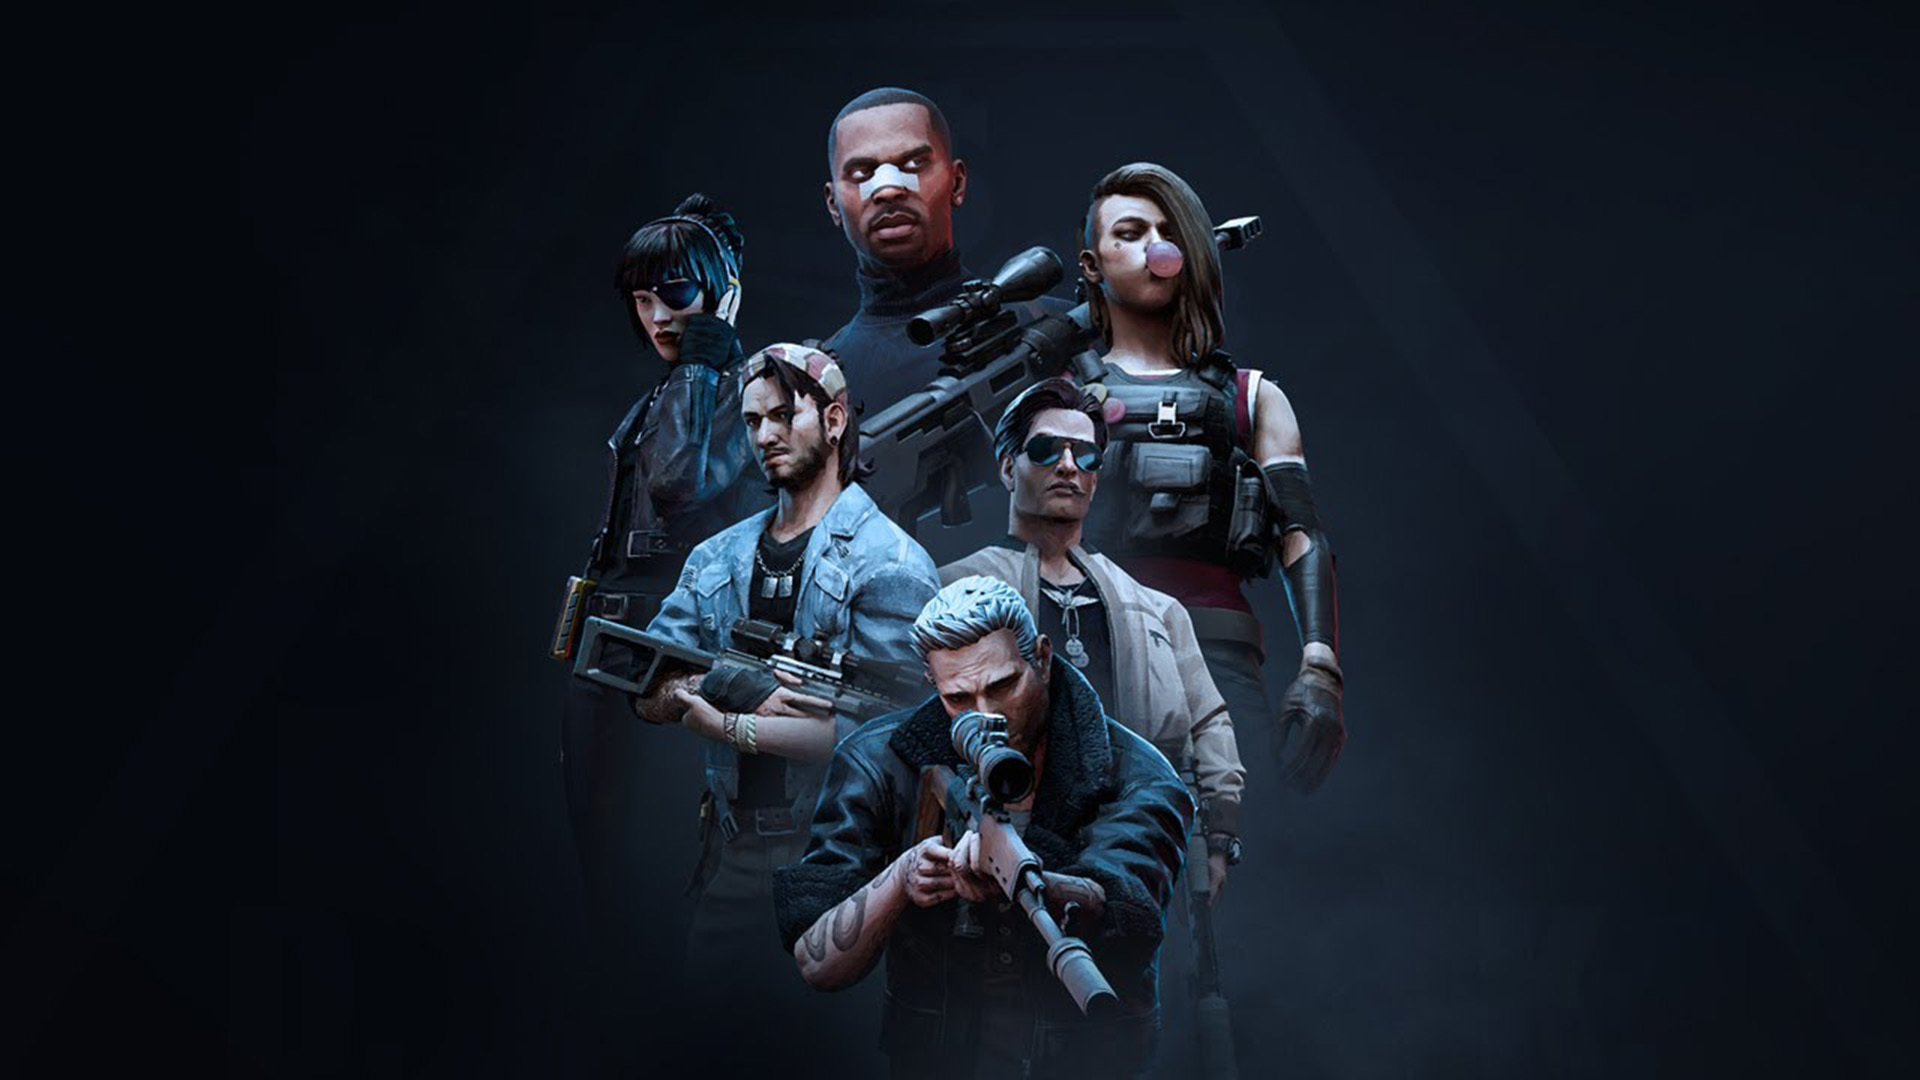 All six of the agents posing for the camera in an action pose.